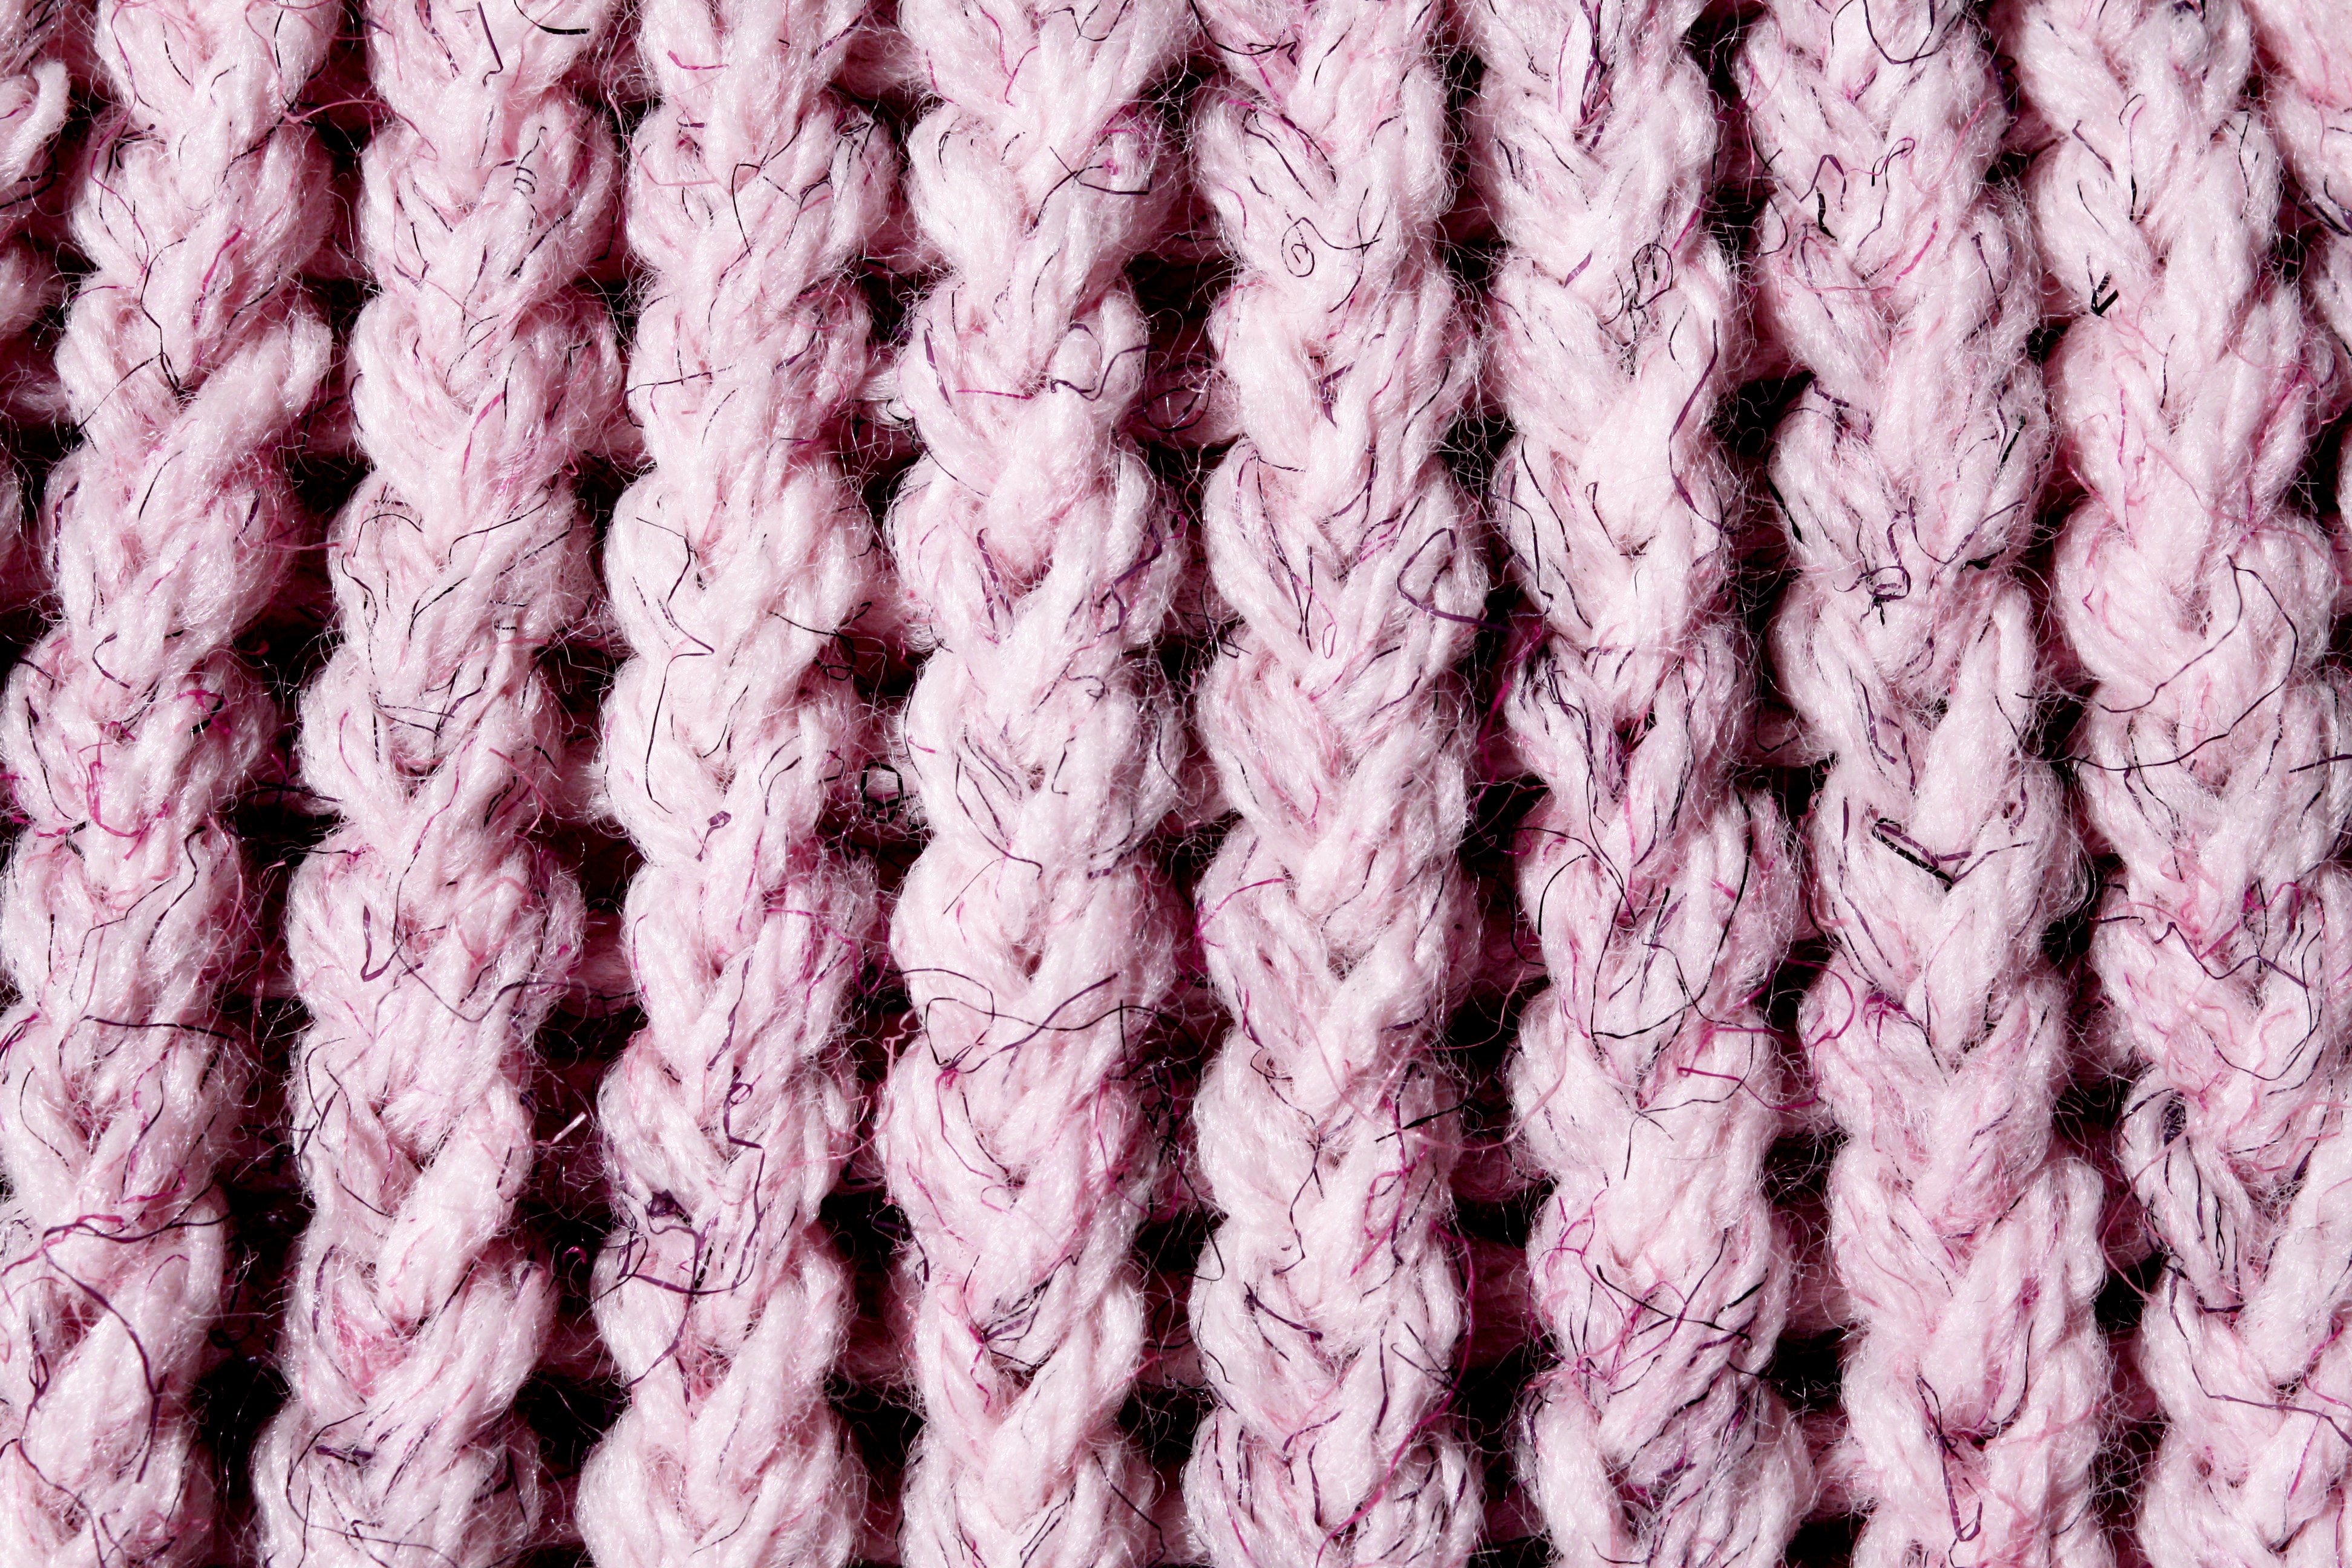 Knitting From Thick Soft Yarn Of Pink Color. Fragment Close-up. Textile  Background. Stock Photo, Picture and Royalty Free Image. Image 95849991.